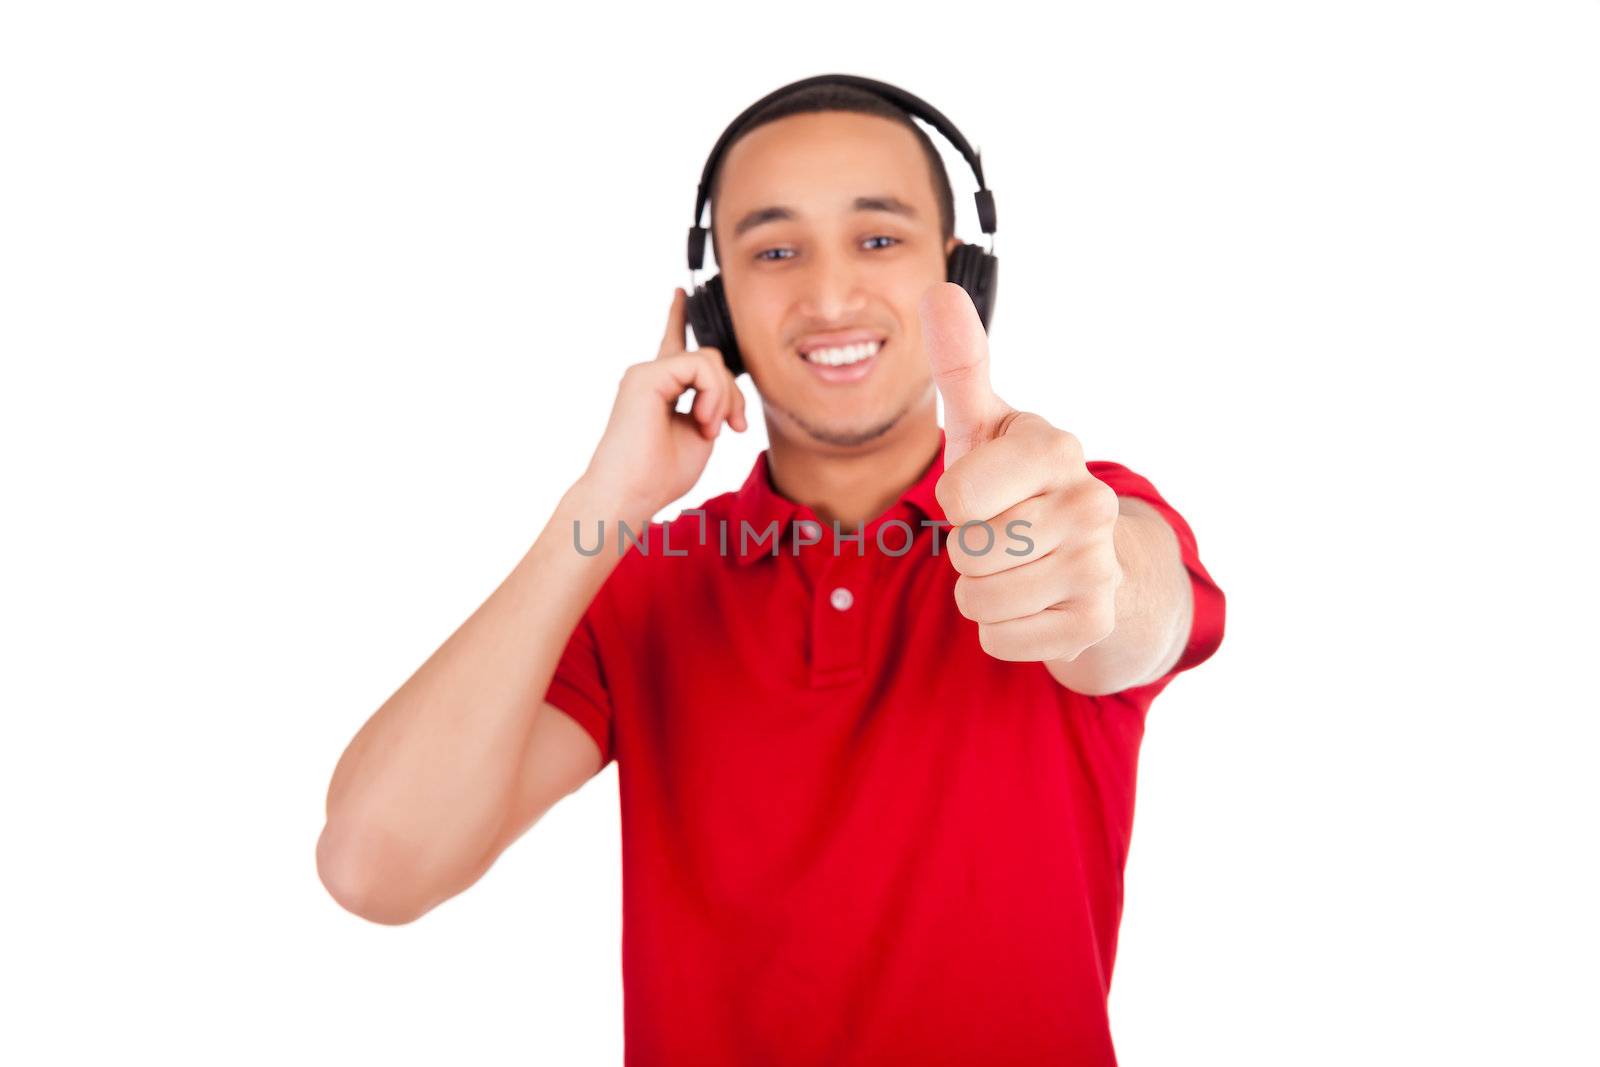 Black man having fun listening to music - isolated over a white background